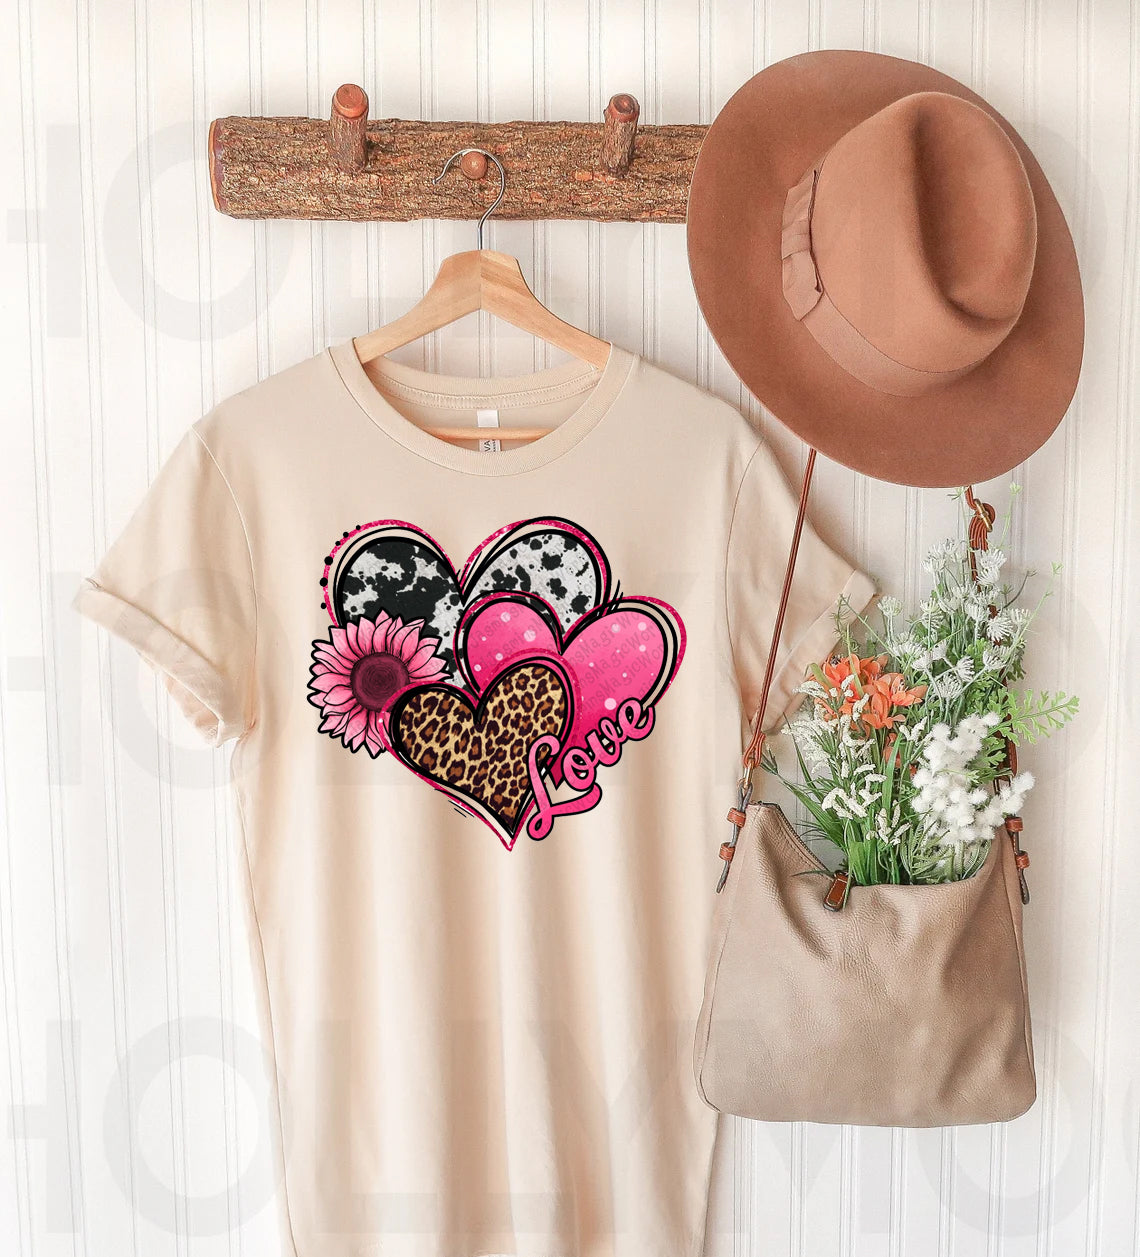 Love Hearts Cow Leopard Graphic Tee